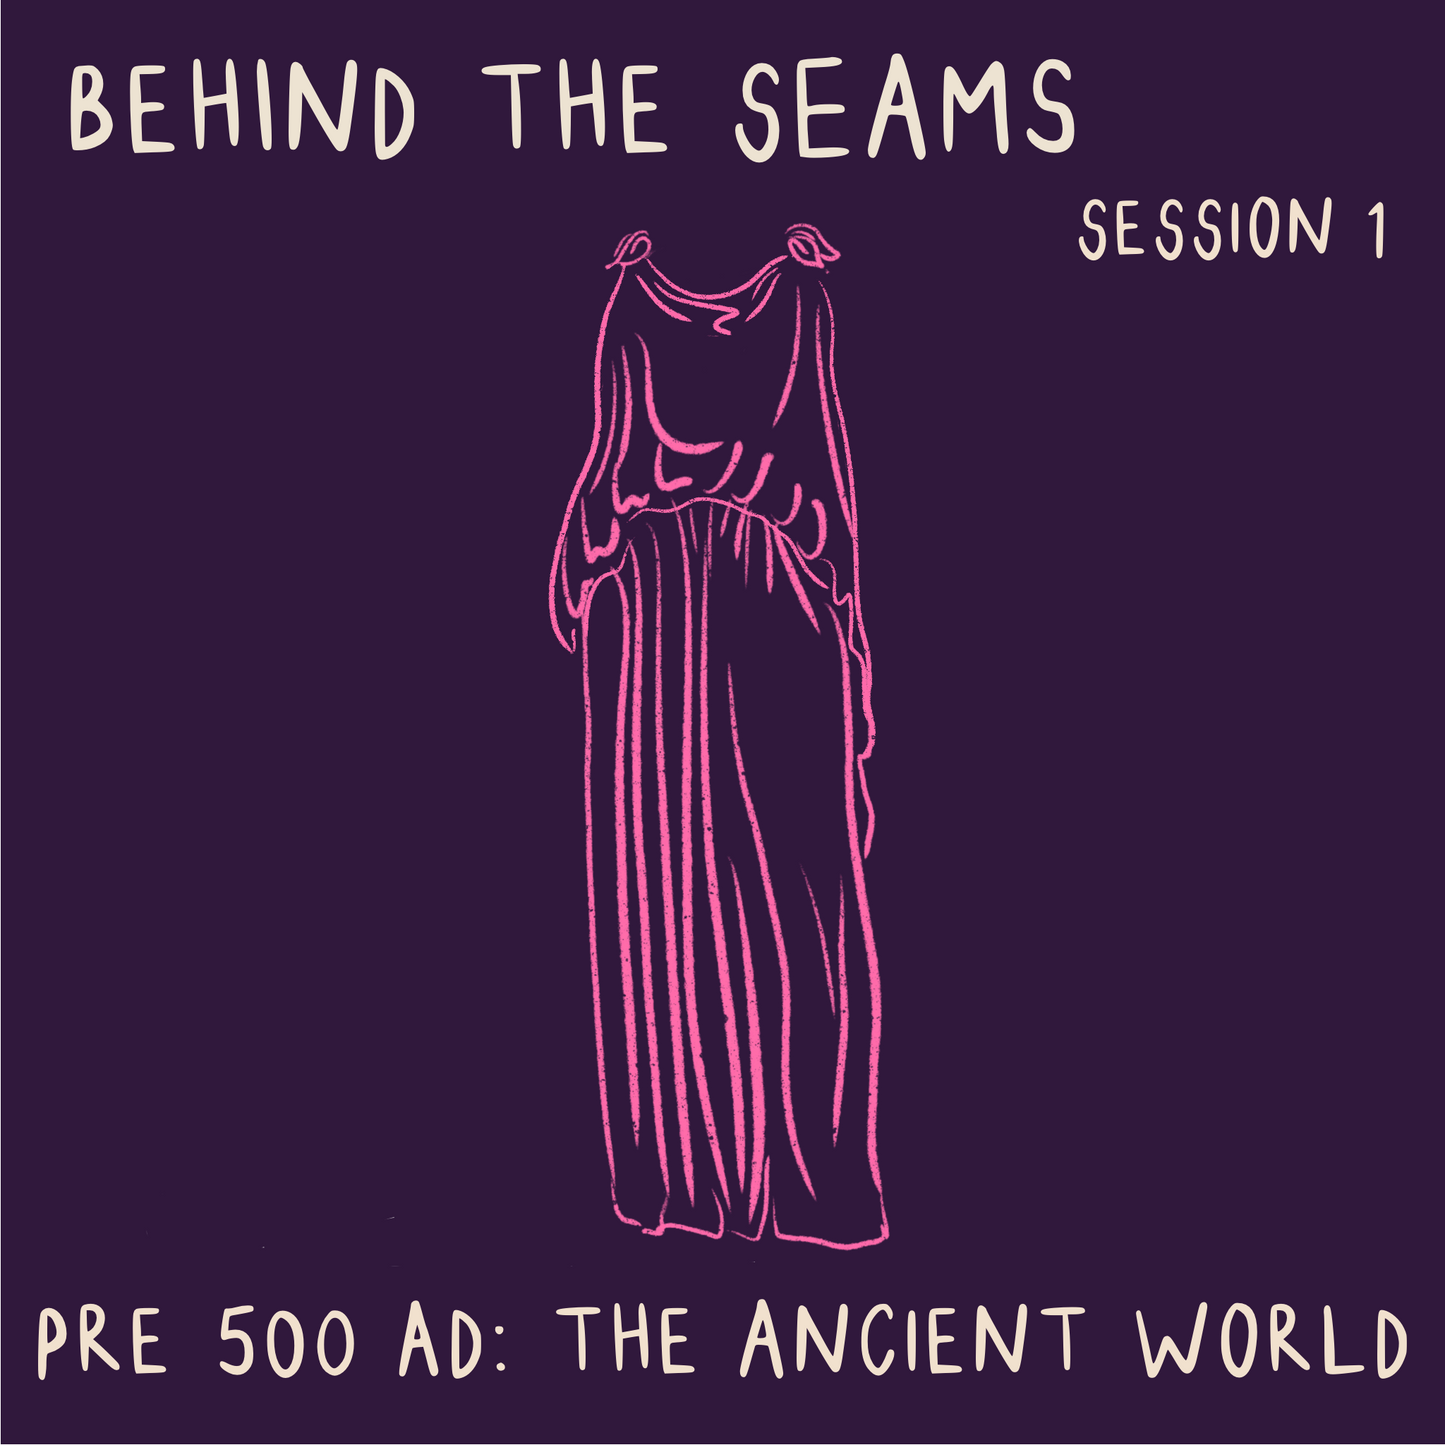 Behind The Seams Session 1: The Ancient World - ON DEMAND